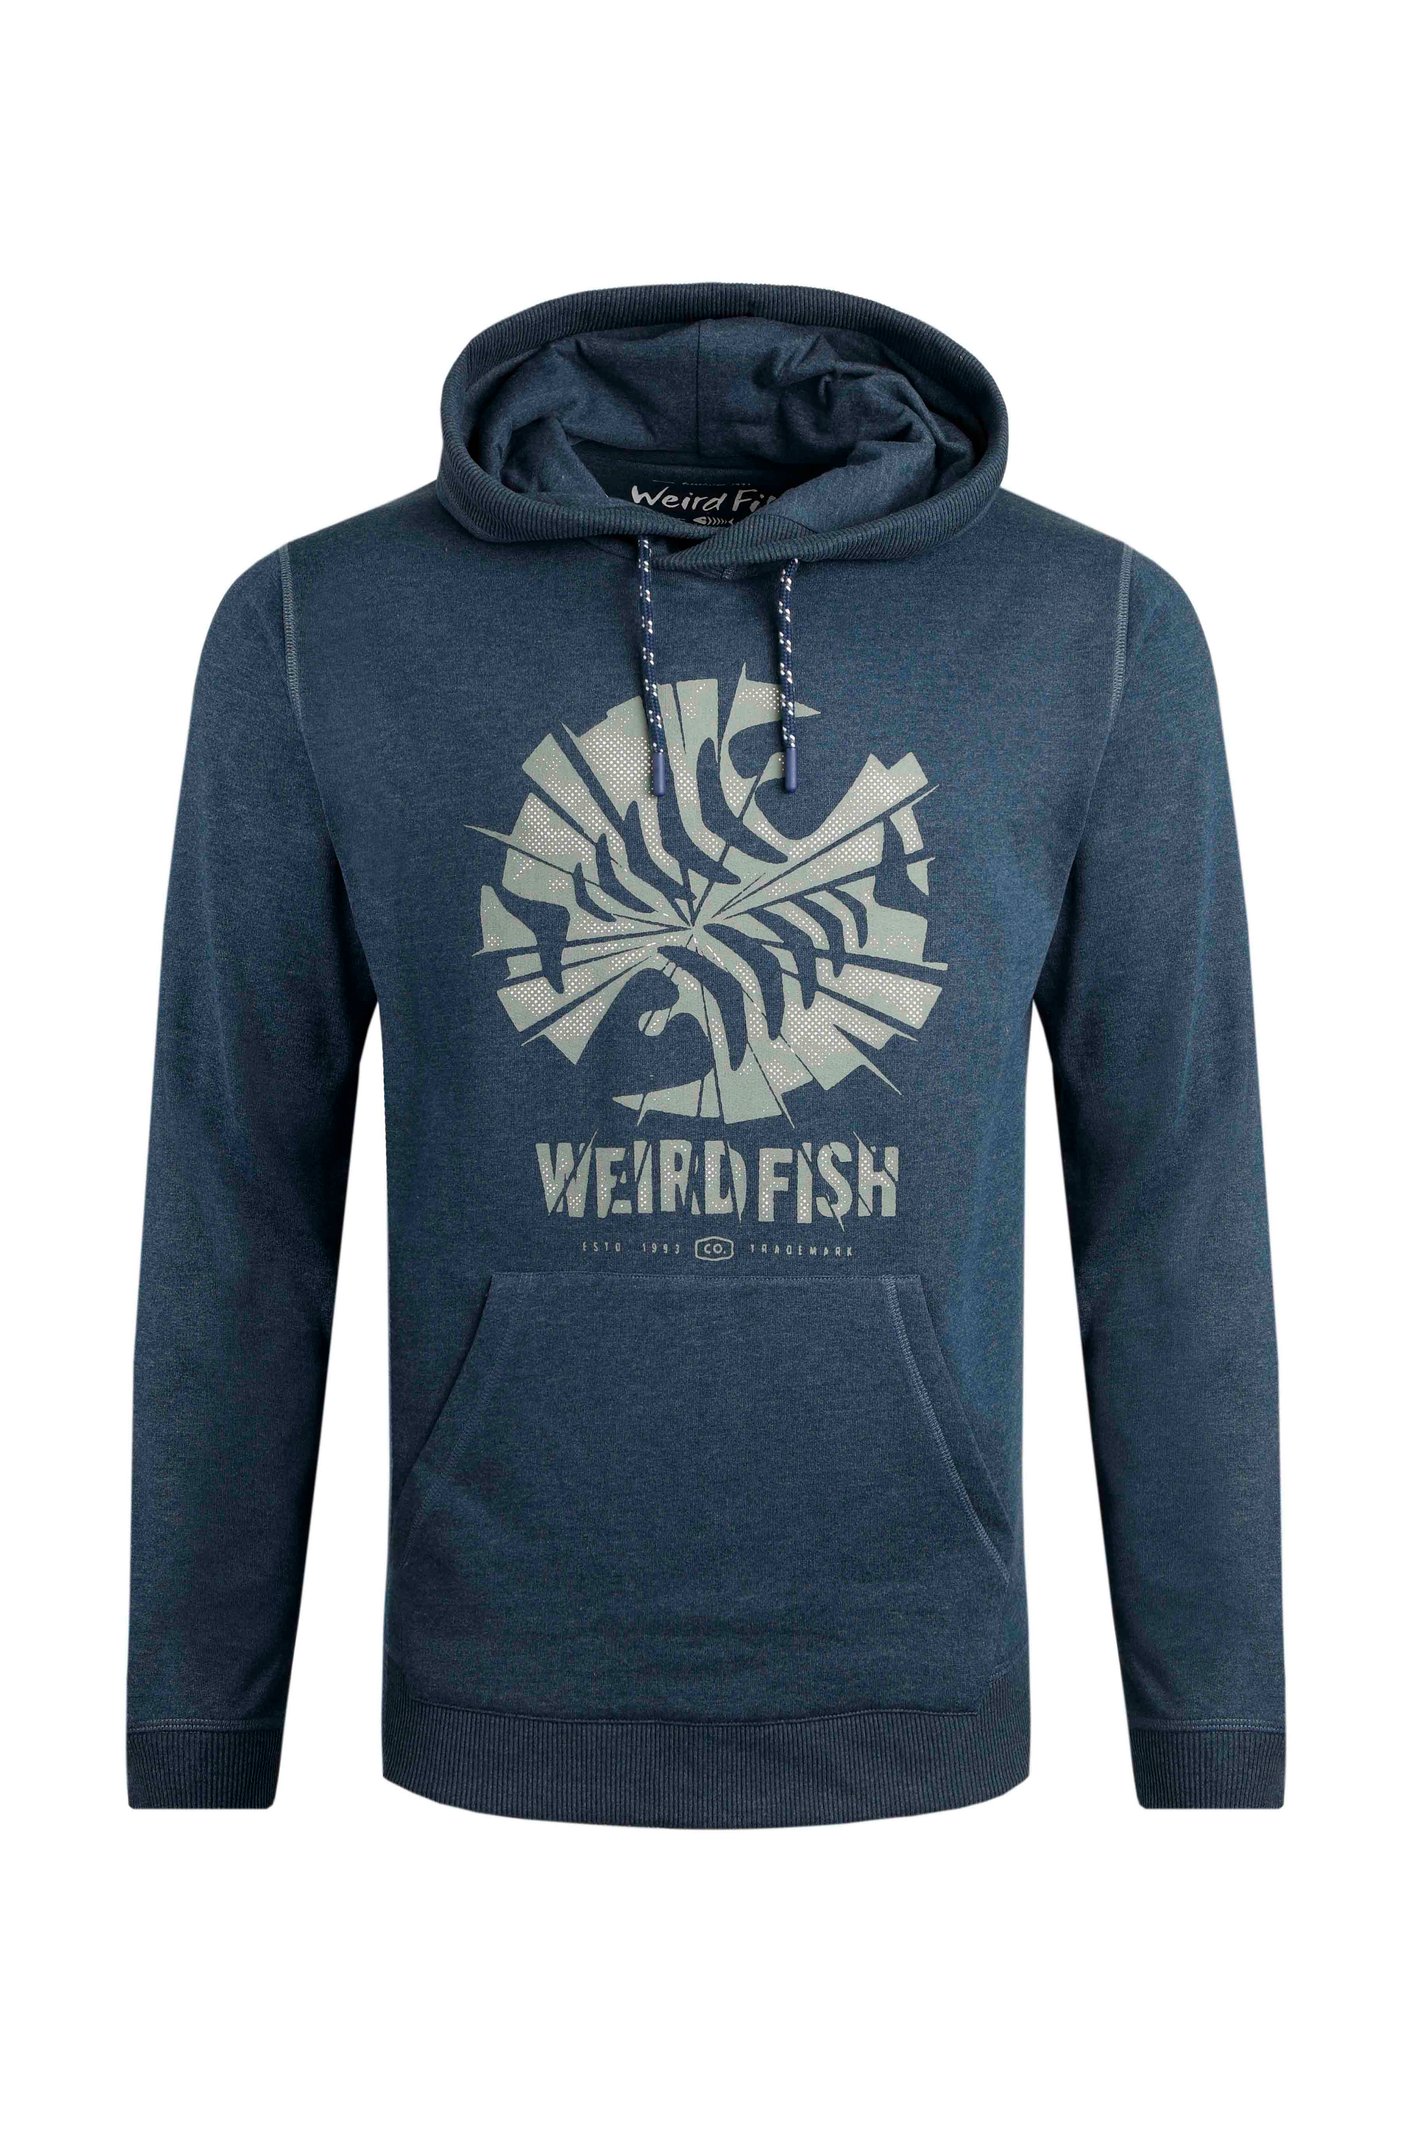 Weird Fish Bryant Graphic Pop Over Hoodie Federal Blue Size XL